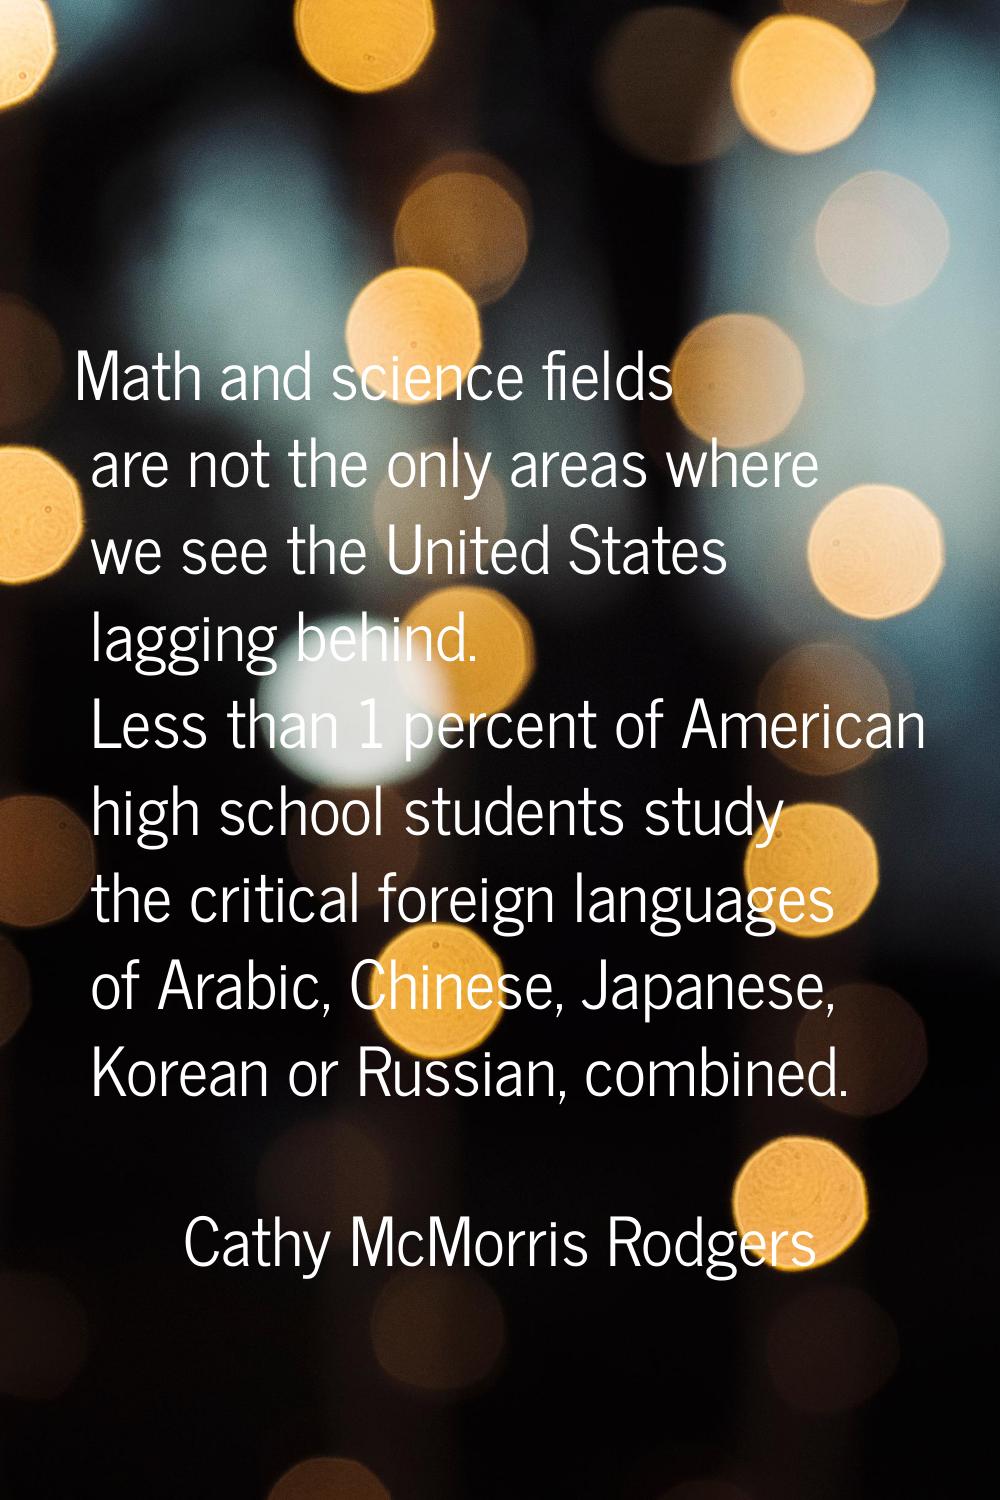 Math and science fields are not the only areas where we see the United States lagging behind. Less 